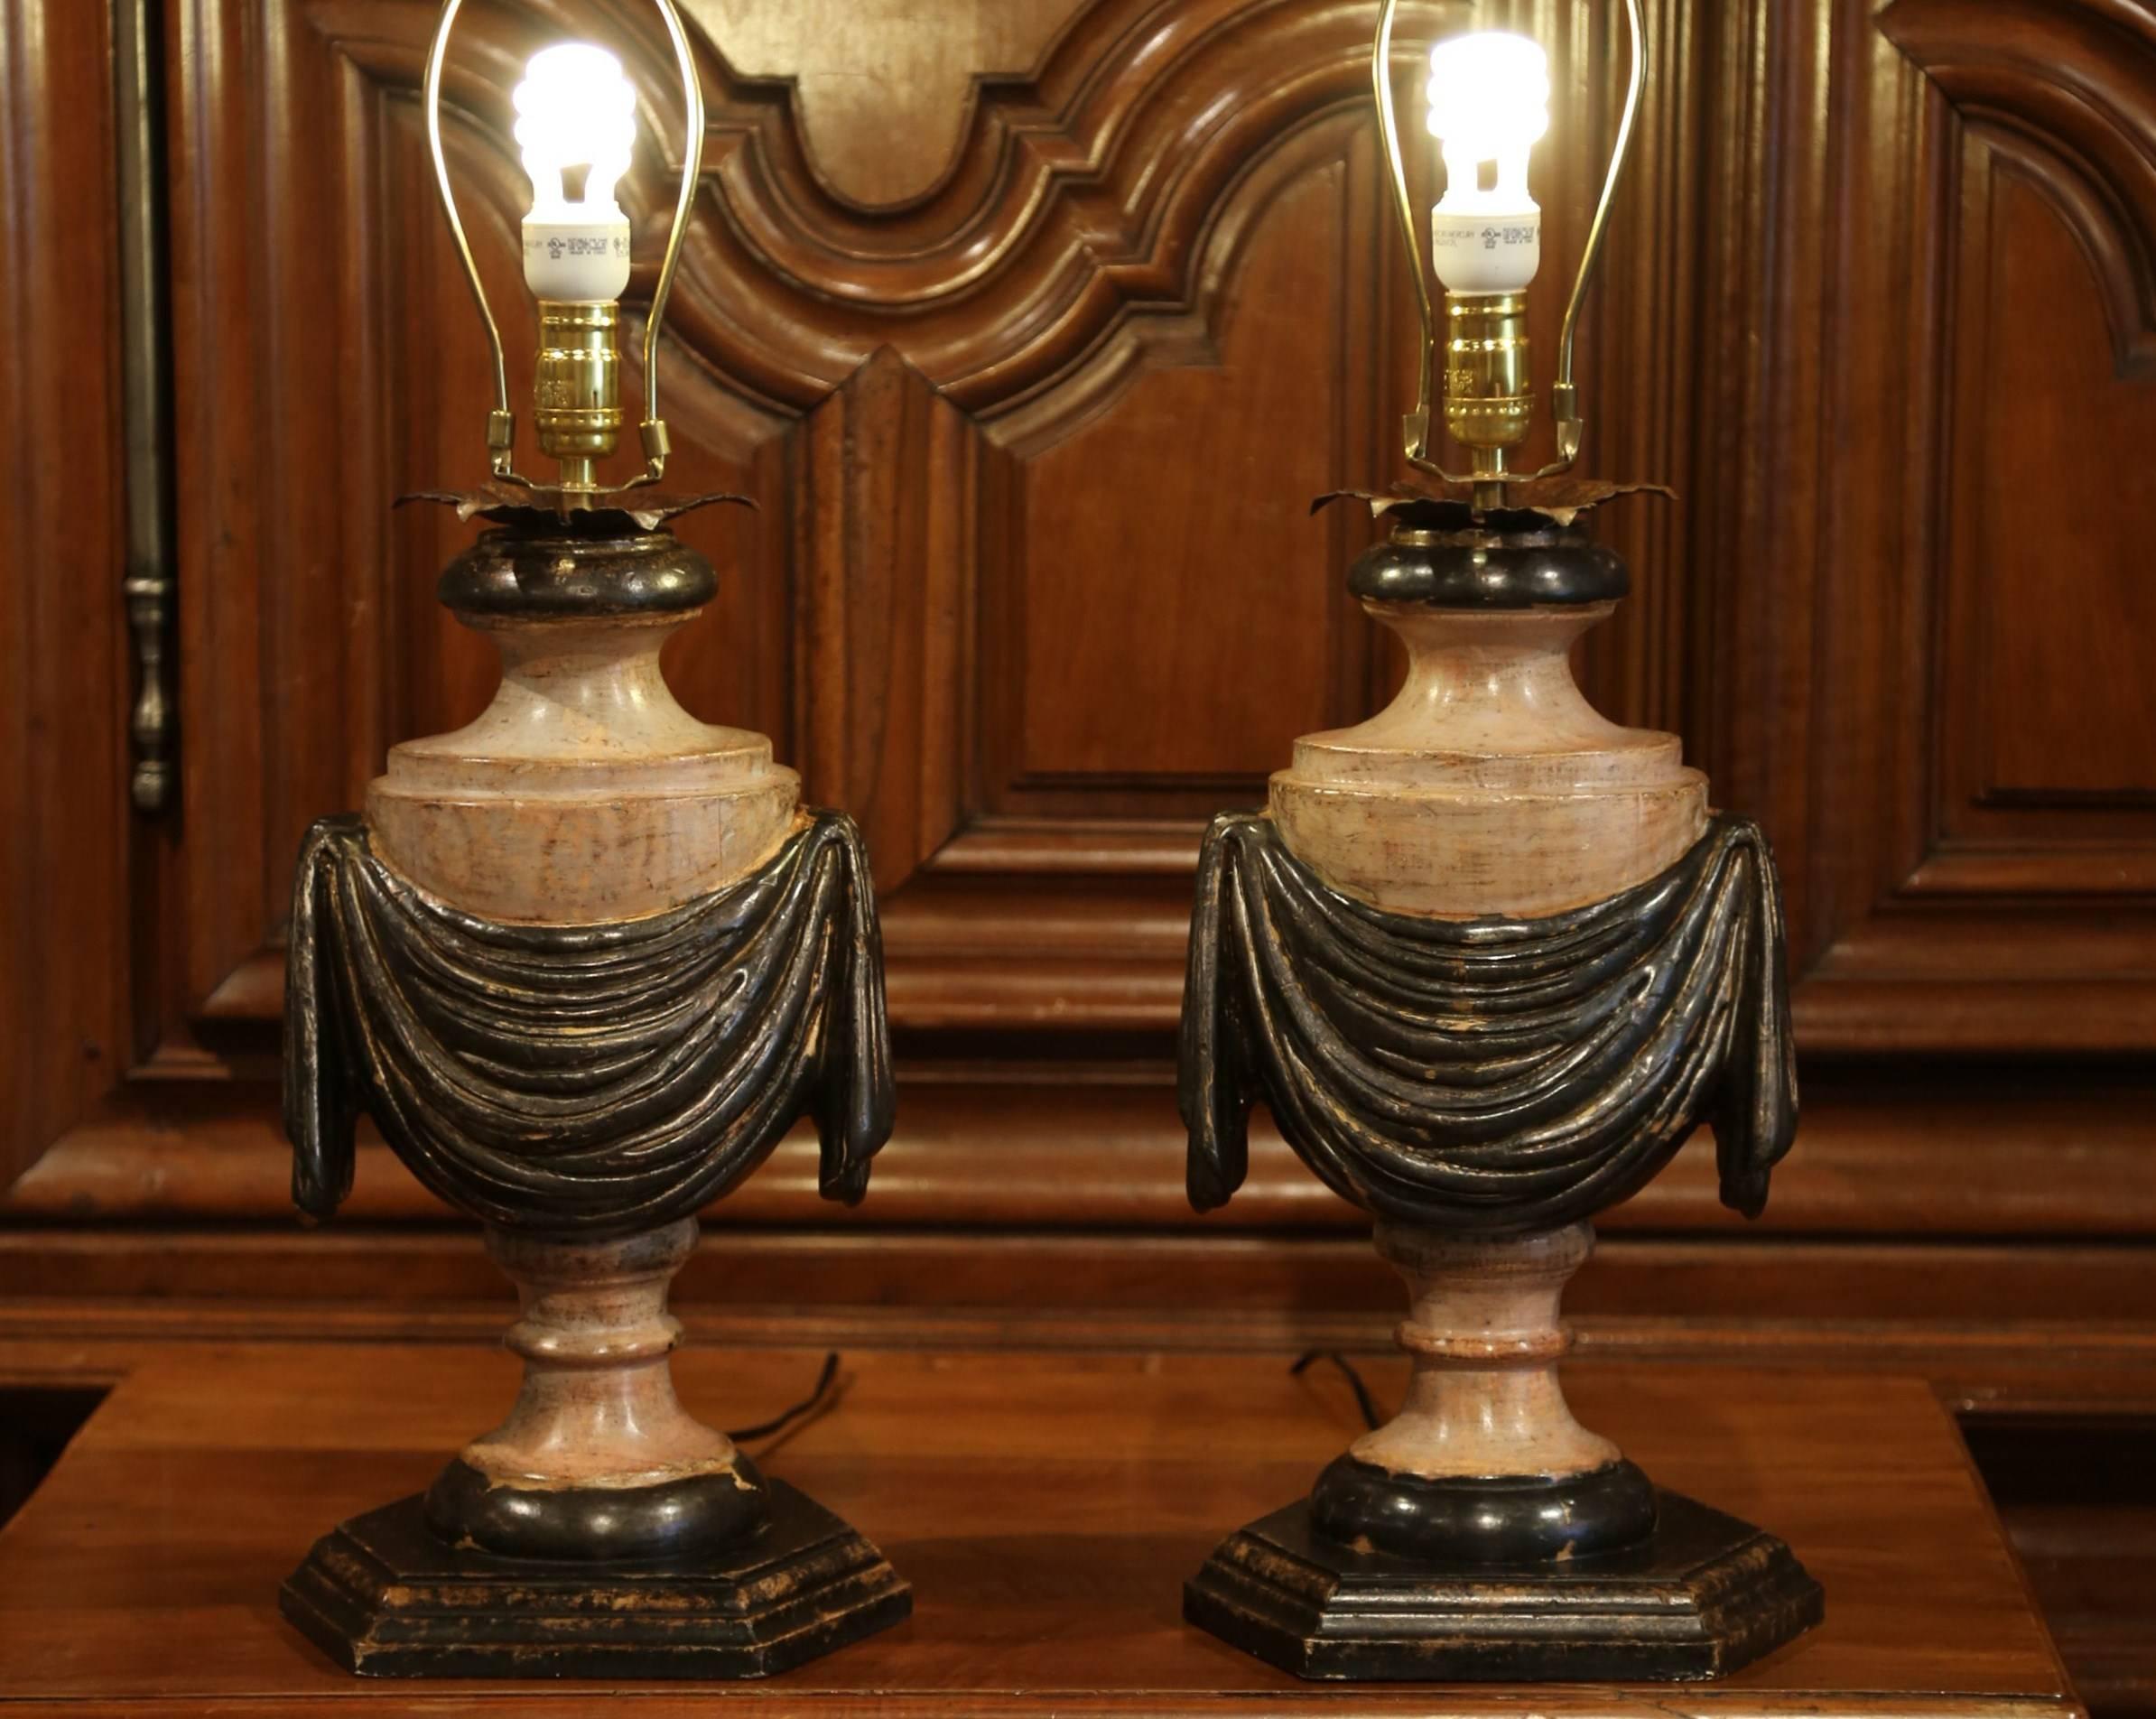 Polychromed Pair of Italian Carved Lamp Bases with Polychrome Antique Painted Finish